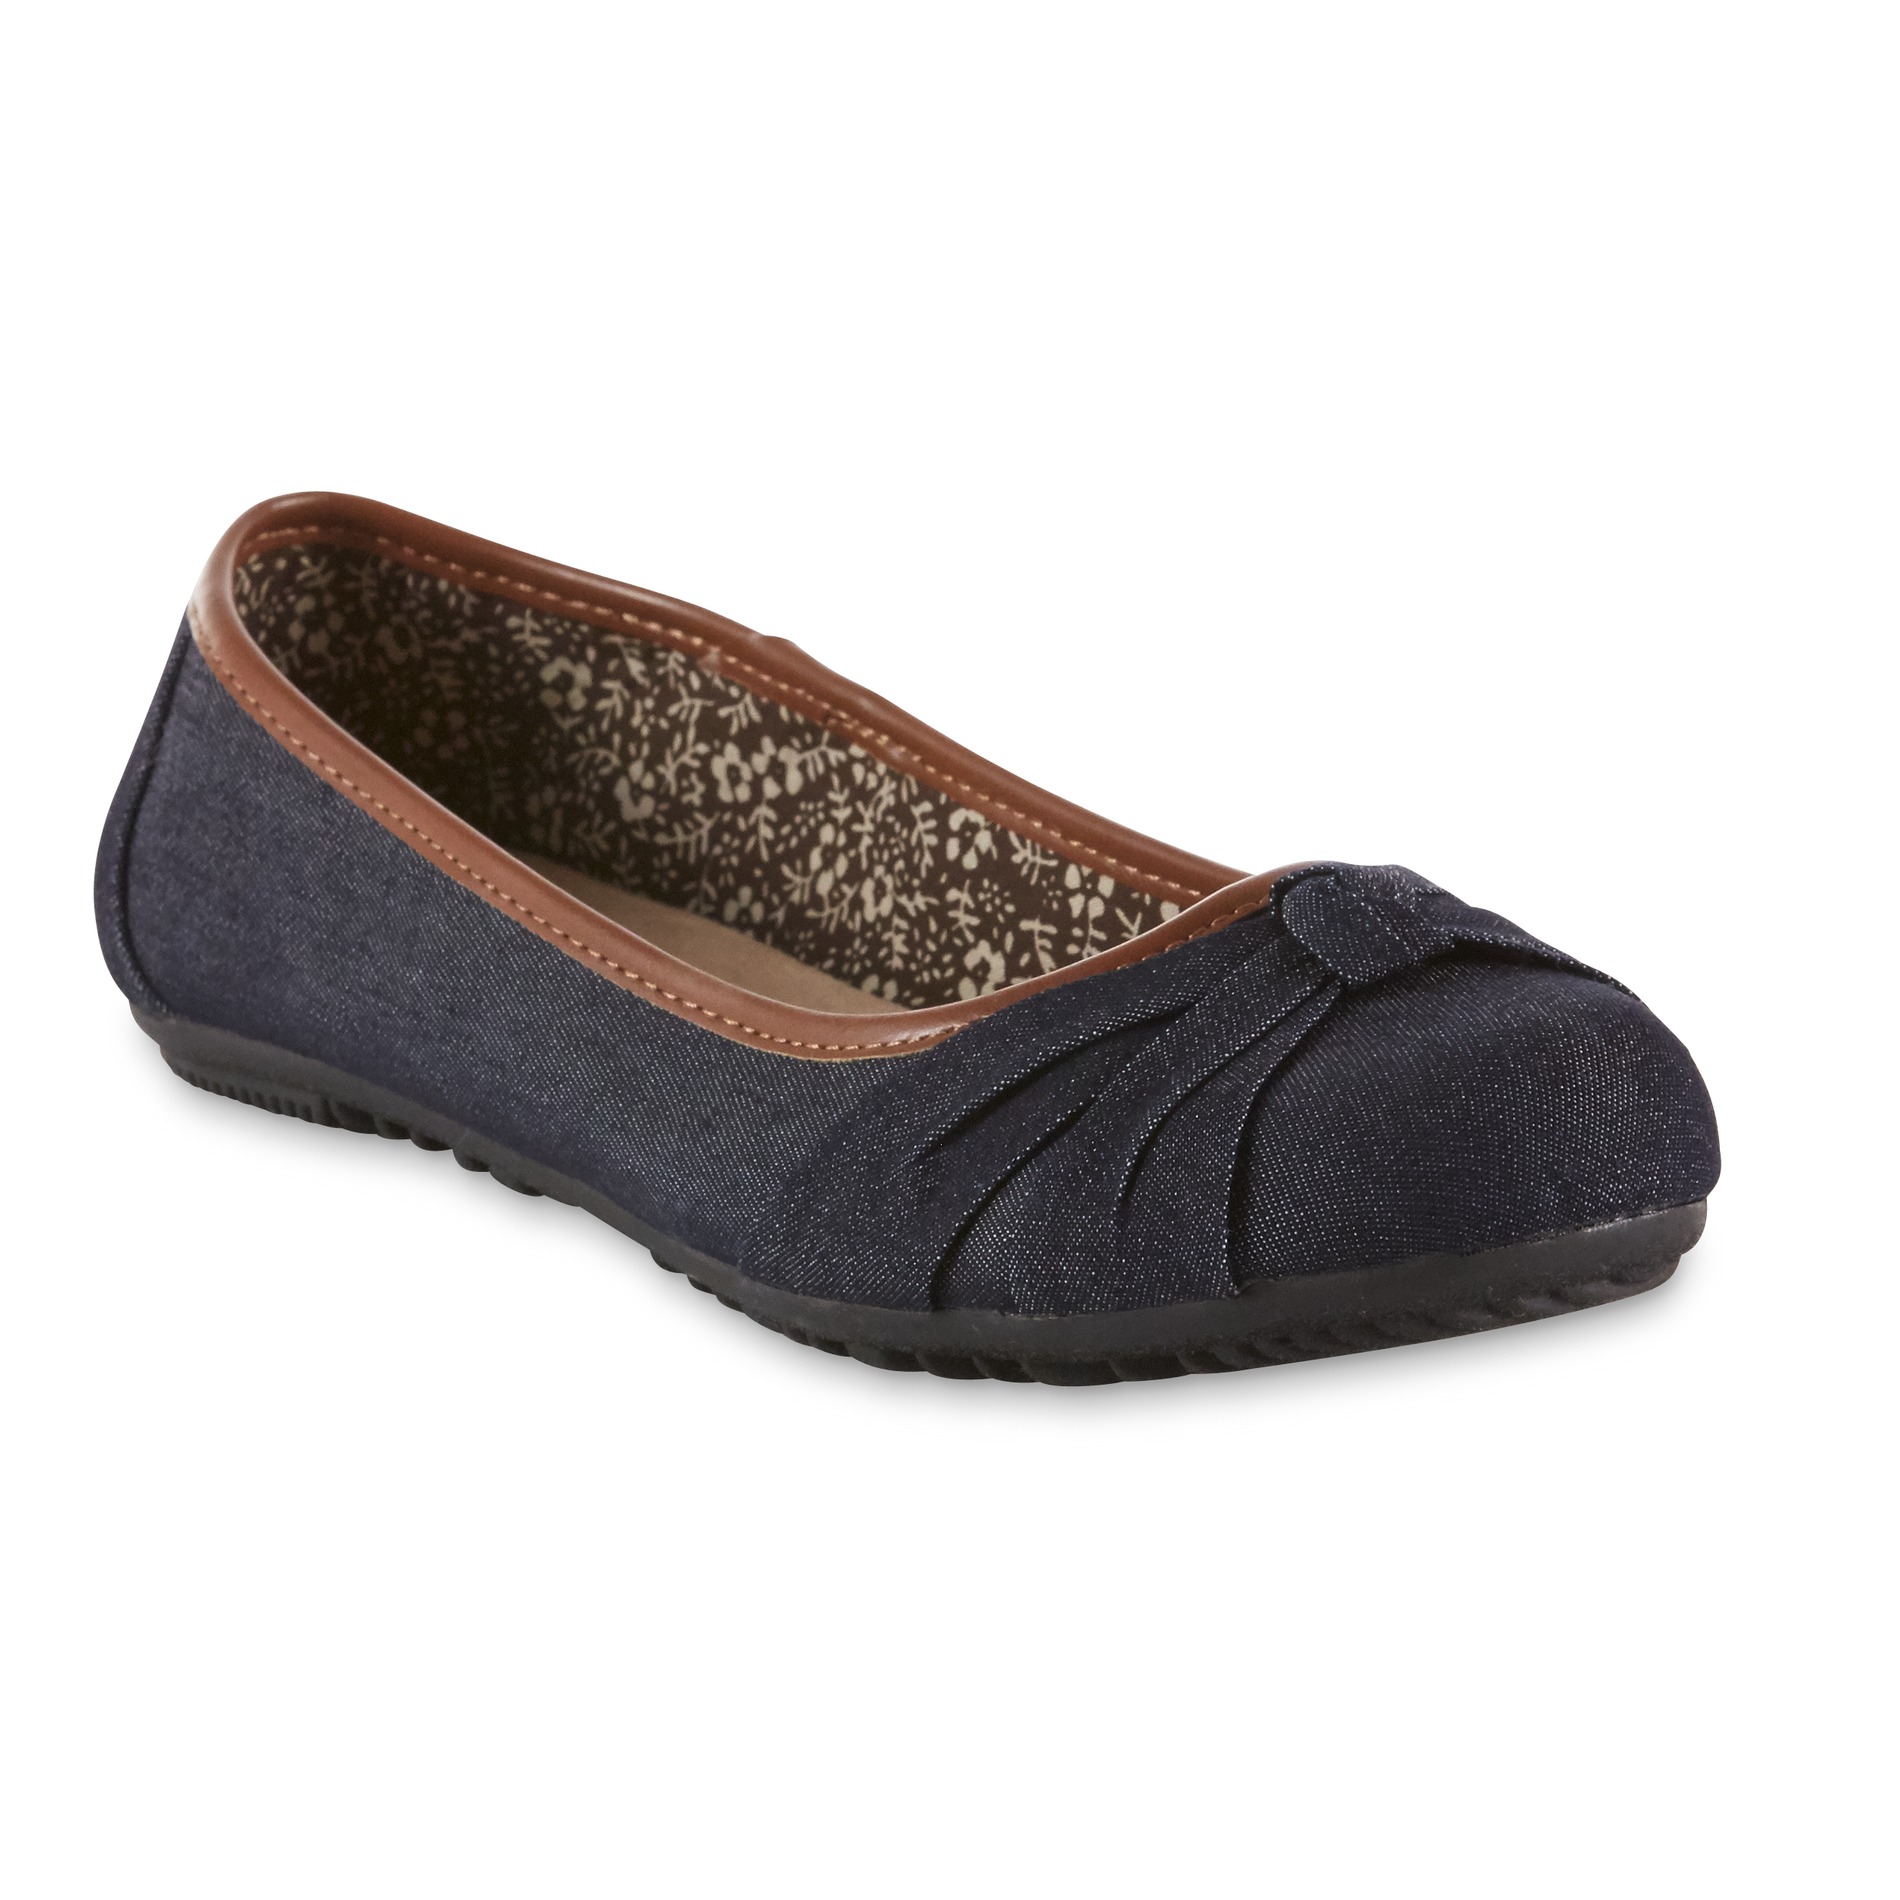 basic editions women's shoes